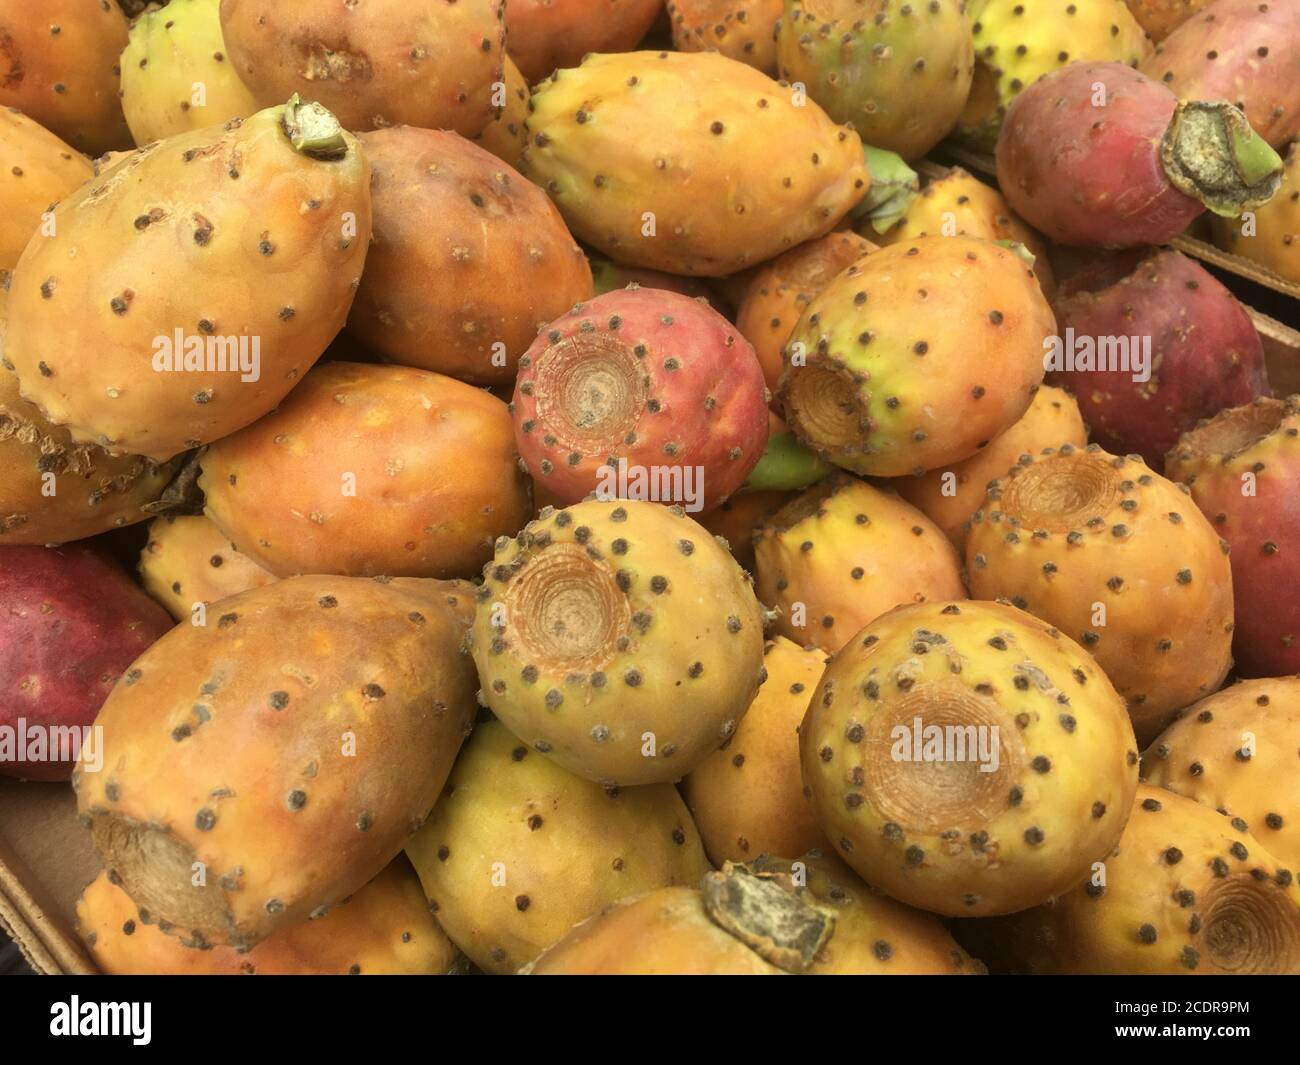 Prickly pear fruits Stock Photo